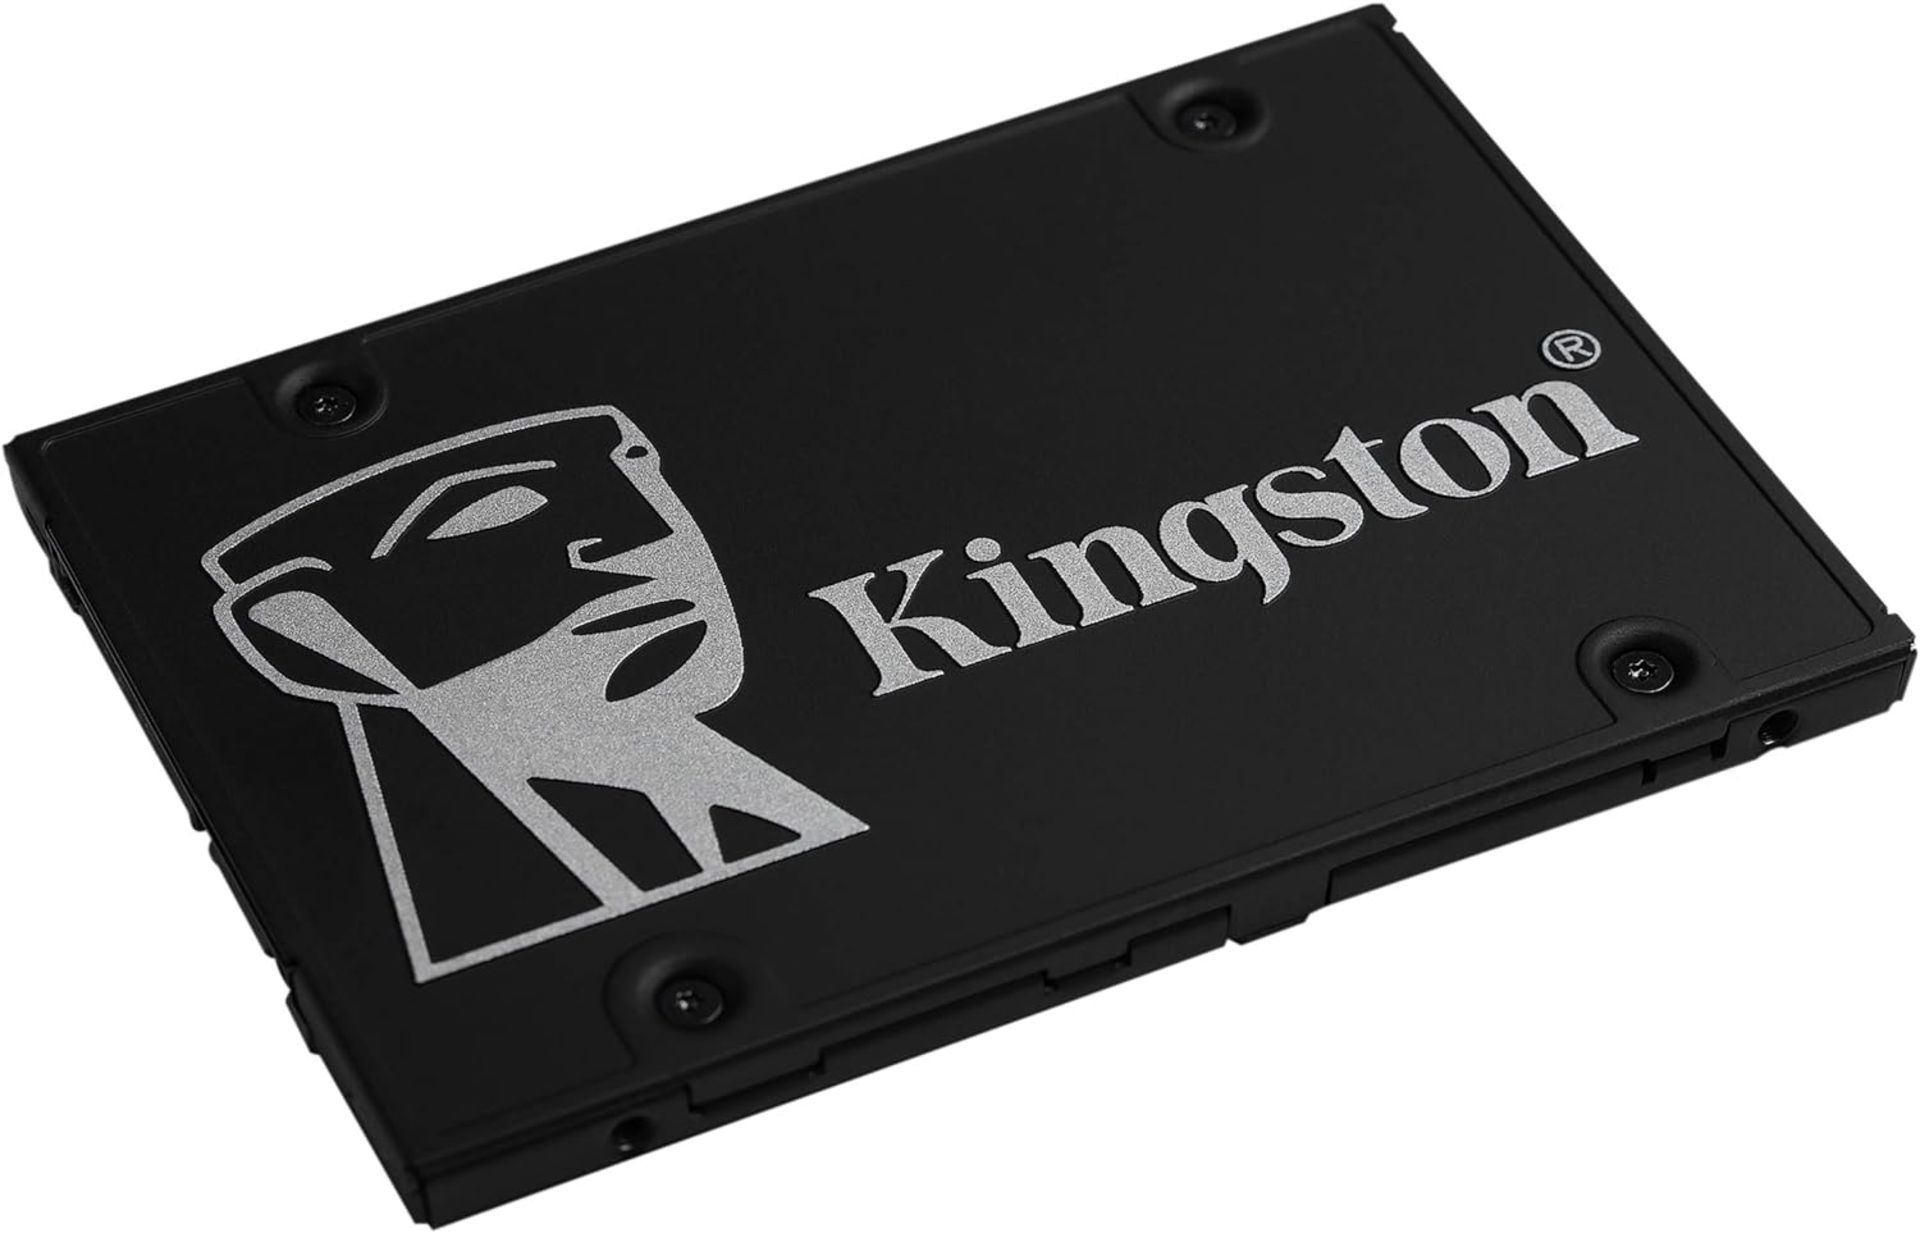 BRAND NEW FACTORY SEALED KINGSTON KC600 512GB SSD. RRP £75.99. Kingston’s KC600 is a full-capacity - Image 2 of 4